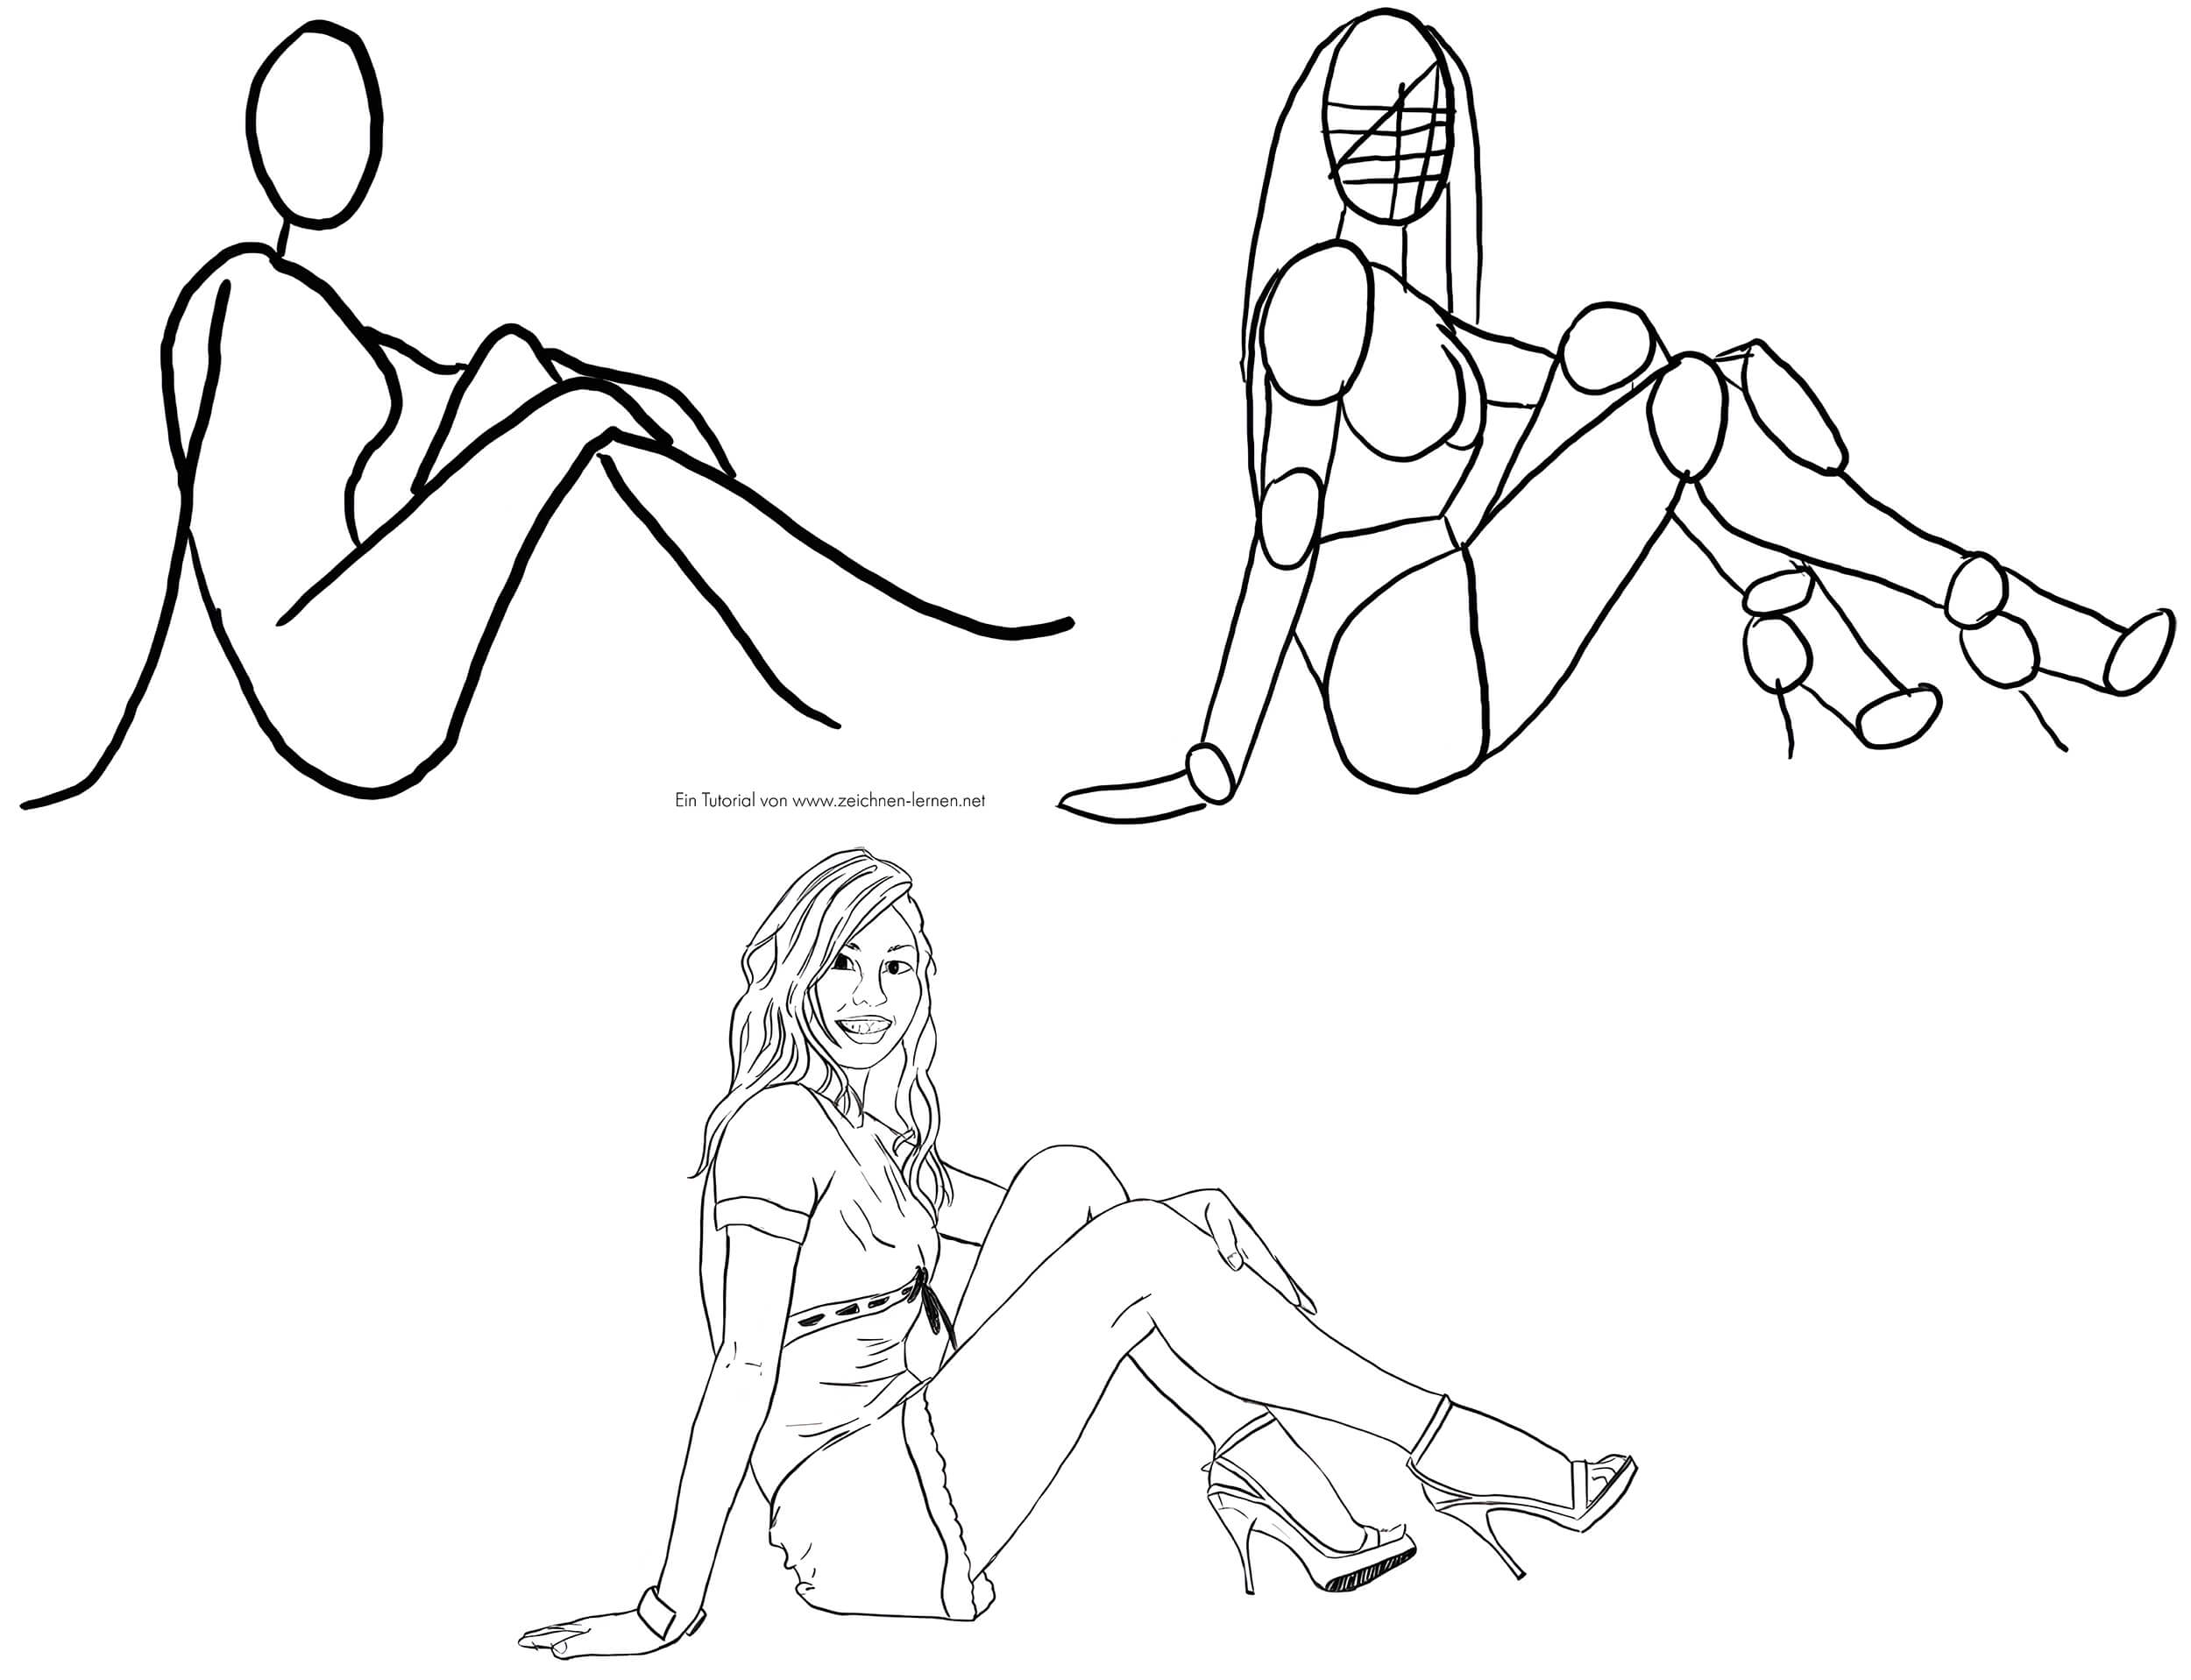 Online Course: Drawing Dynamic Poses from Skillshare | Class Central